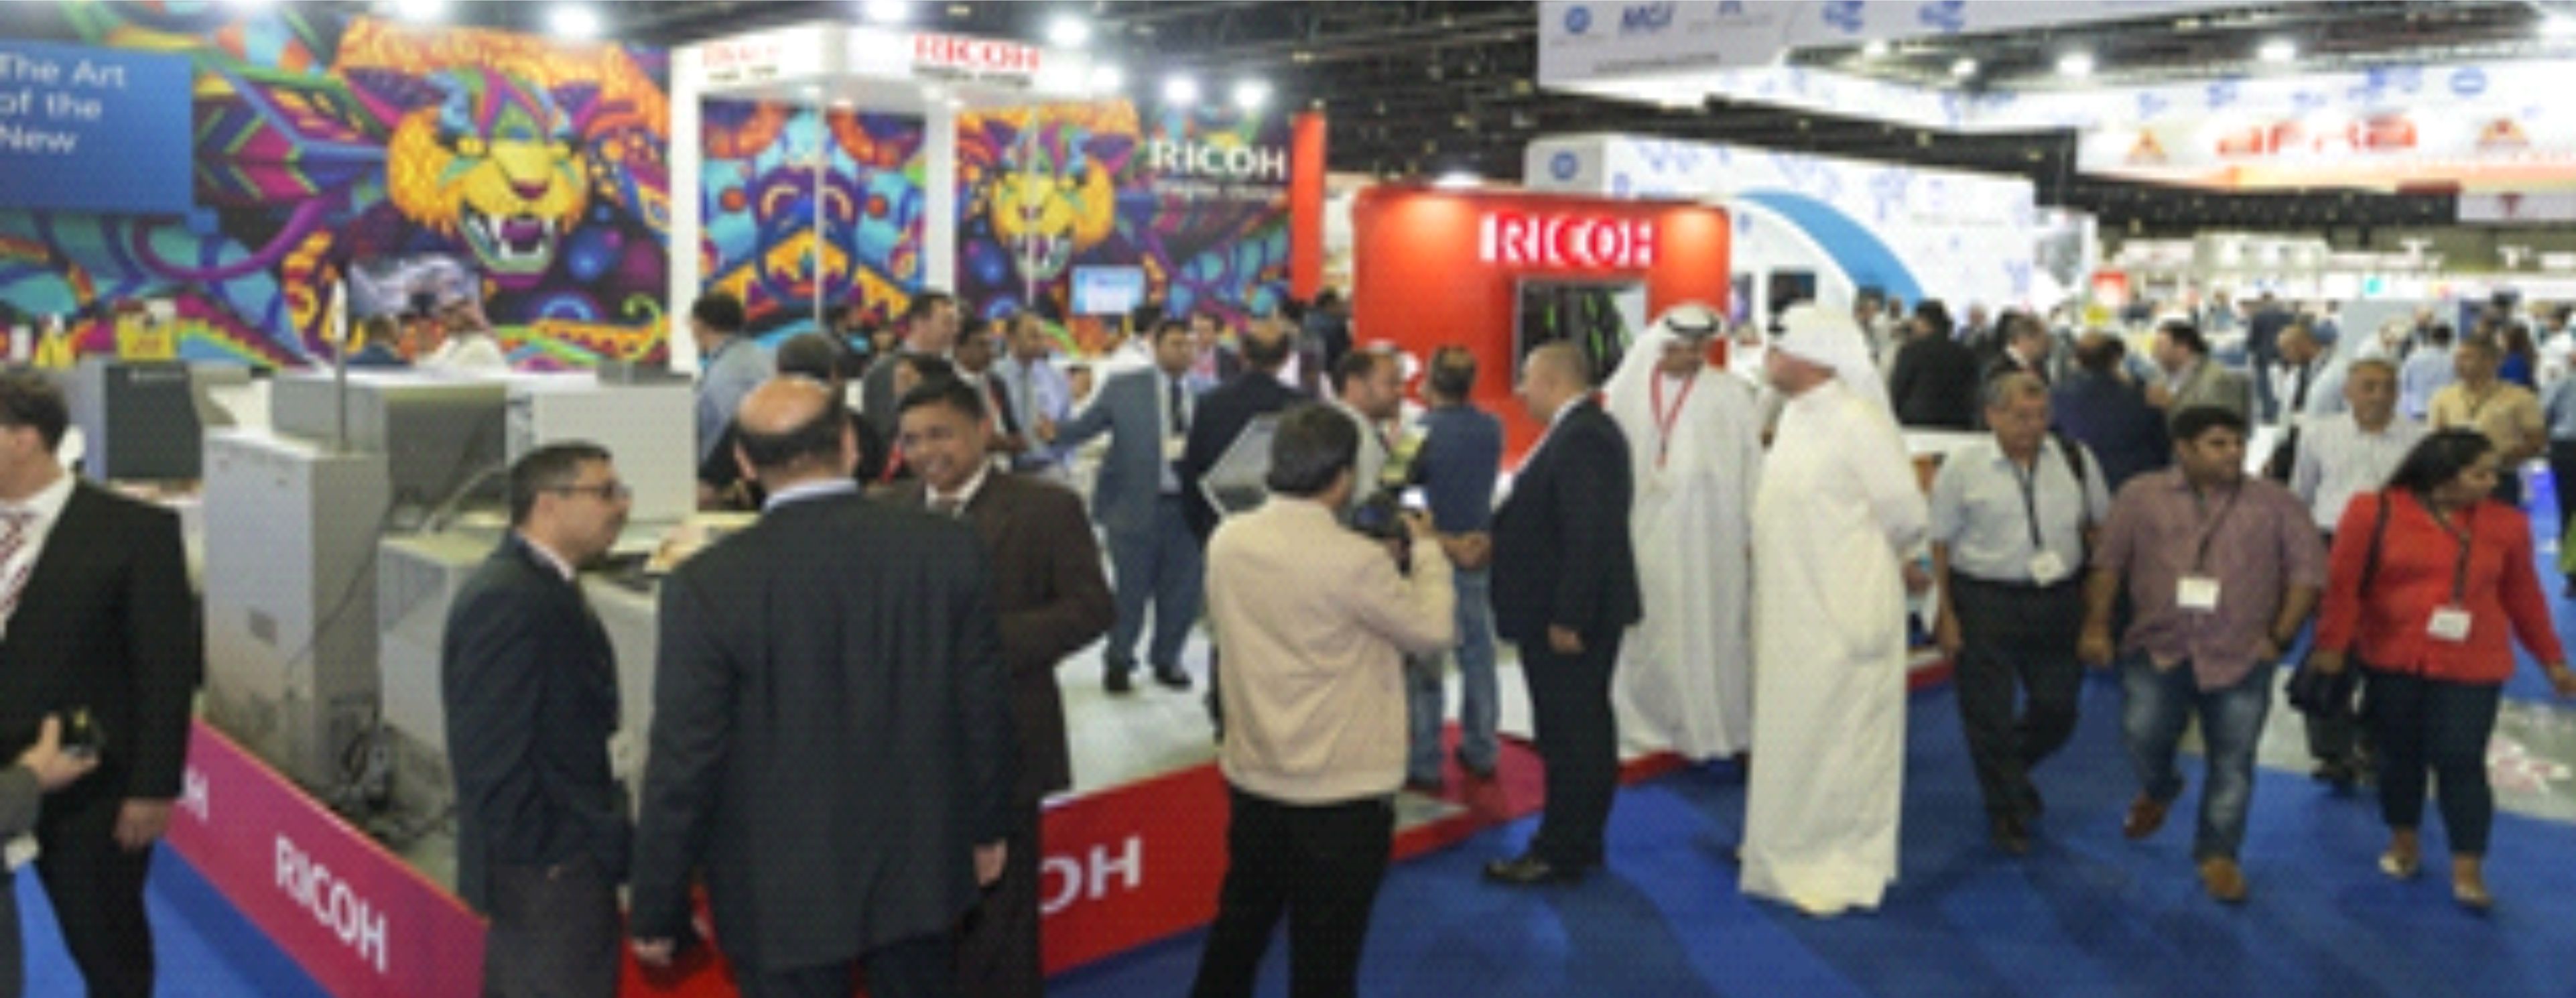 Deals Worth Millions of Dollars Sealed at Gulf Print & Pack 2019